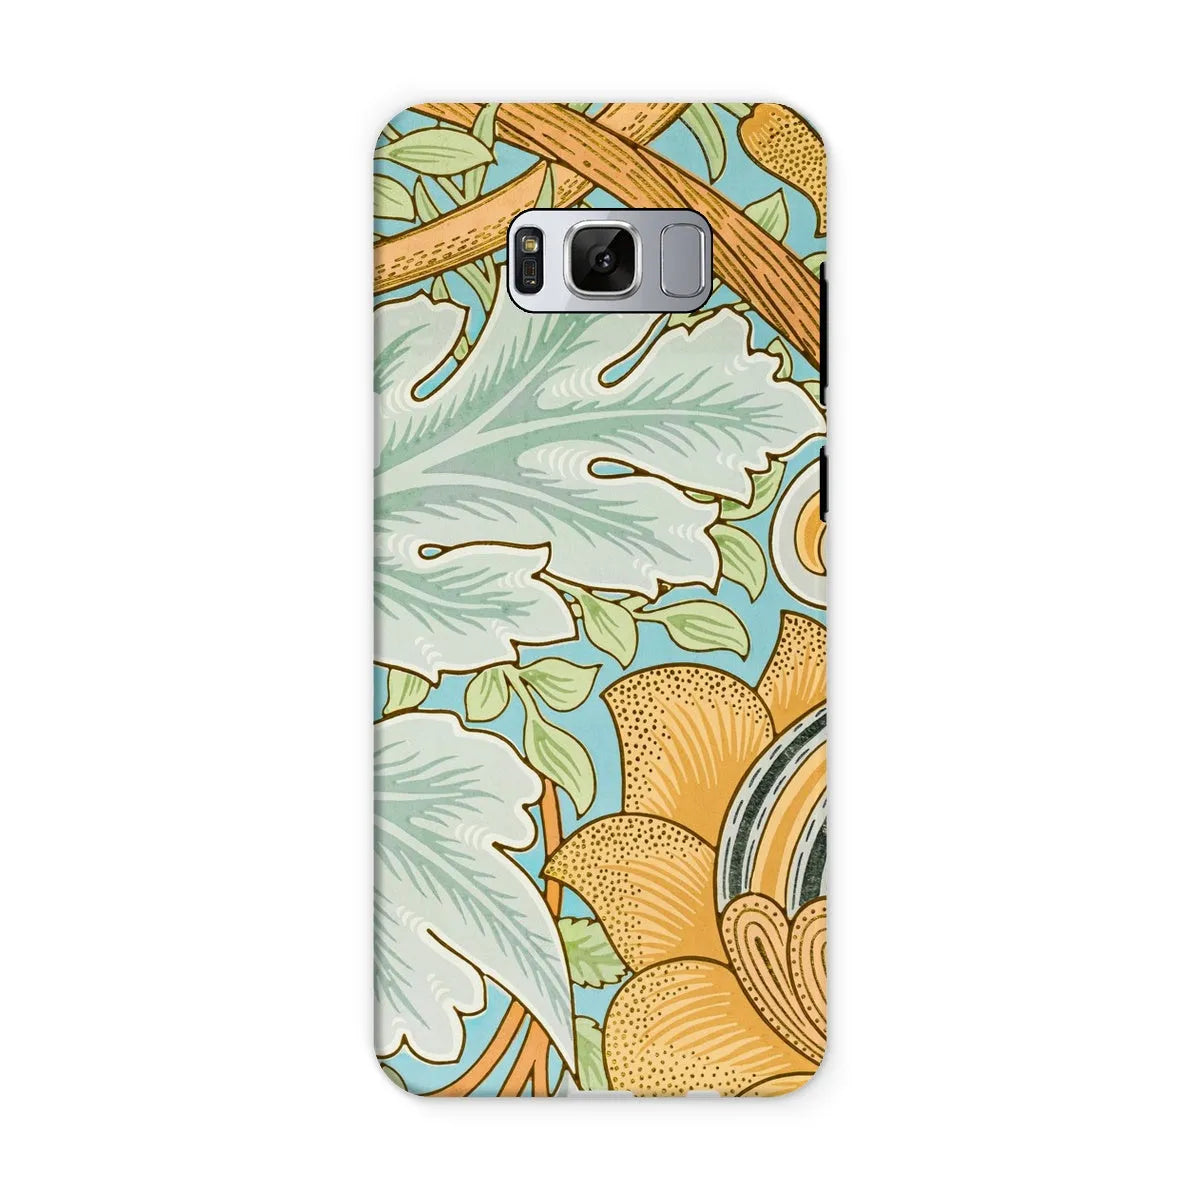 St. James - Arts And Crafts Phone Case - William Morris - Samsung Galaxy S8 / Matte - Mobile Phone Cases - Aesthetic Art